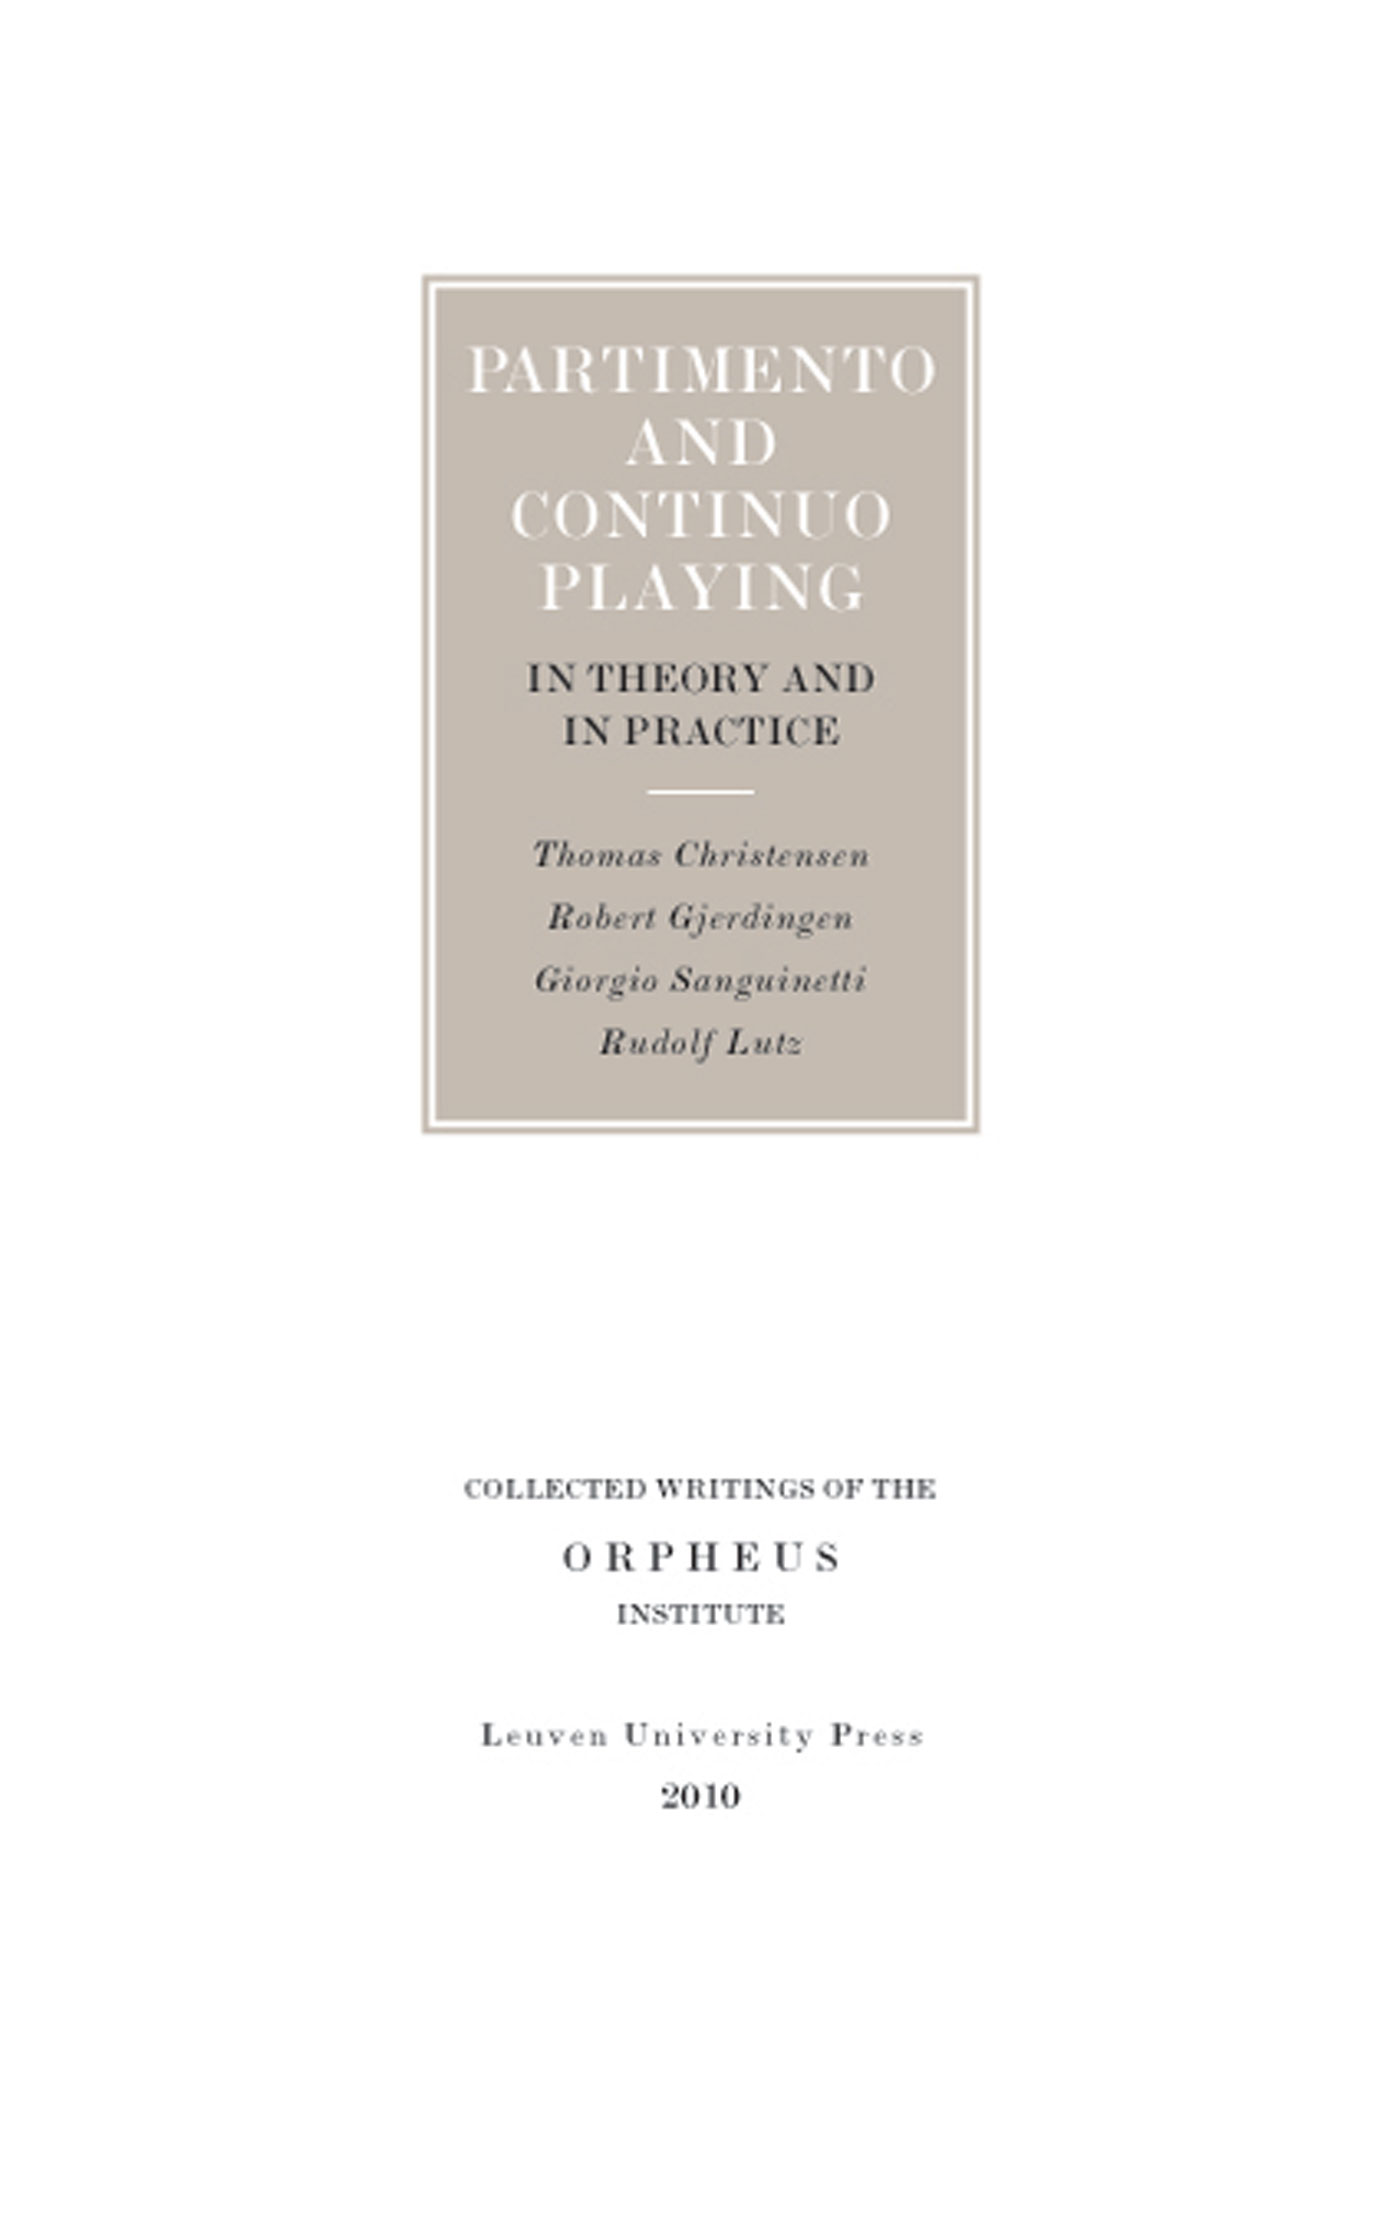 Partimento and continuo playing in theory and in practice (Ebook)